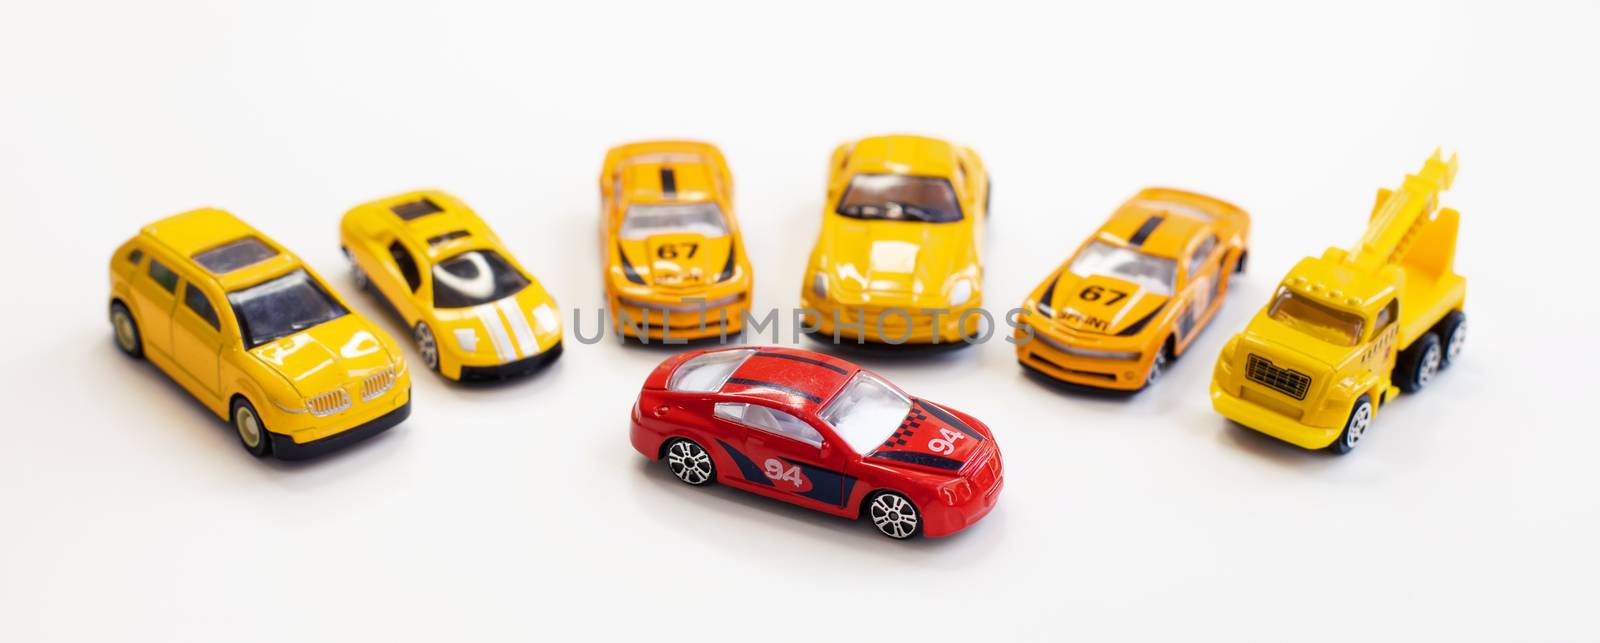 A red car toy surrounded by orange cars by tadeush89